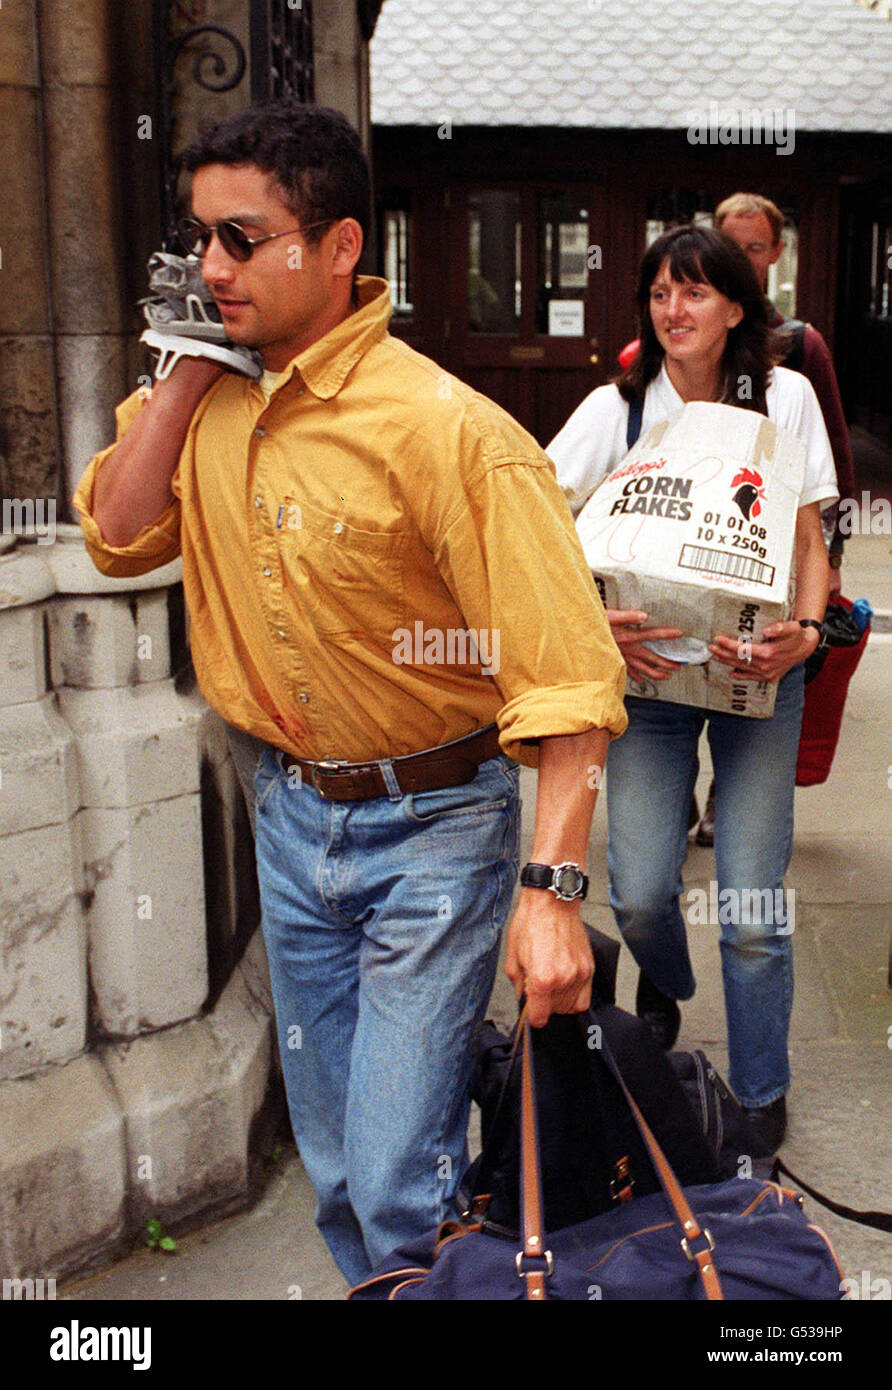 Roland and Susan Gianstefani, two members of a religious cult, leaving the High Court in London. The couple were spared a jail sentence for refusing to tell the High Court the whereabouts of runaway Bobby Kelly, after a personal plea to the judge. * ...by 16-year-old Kelly. Stock Photo